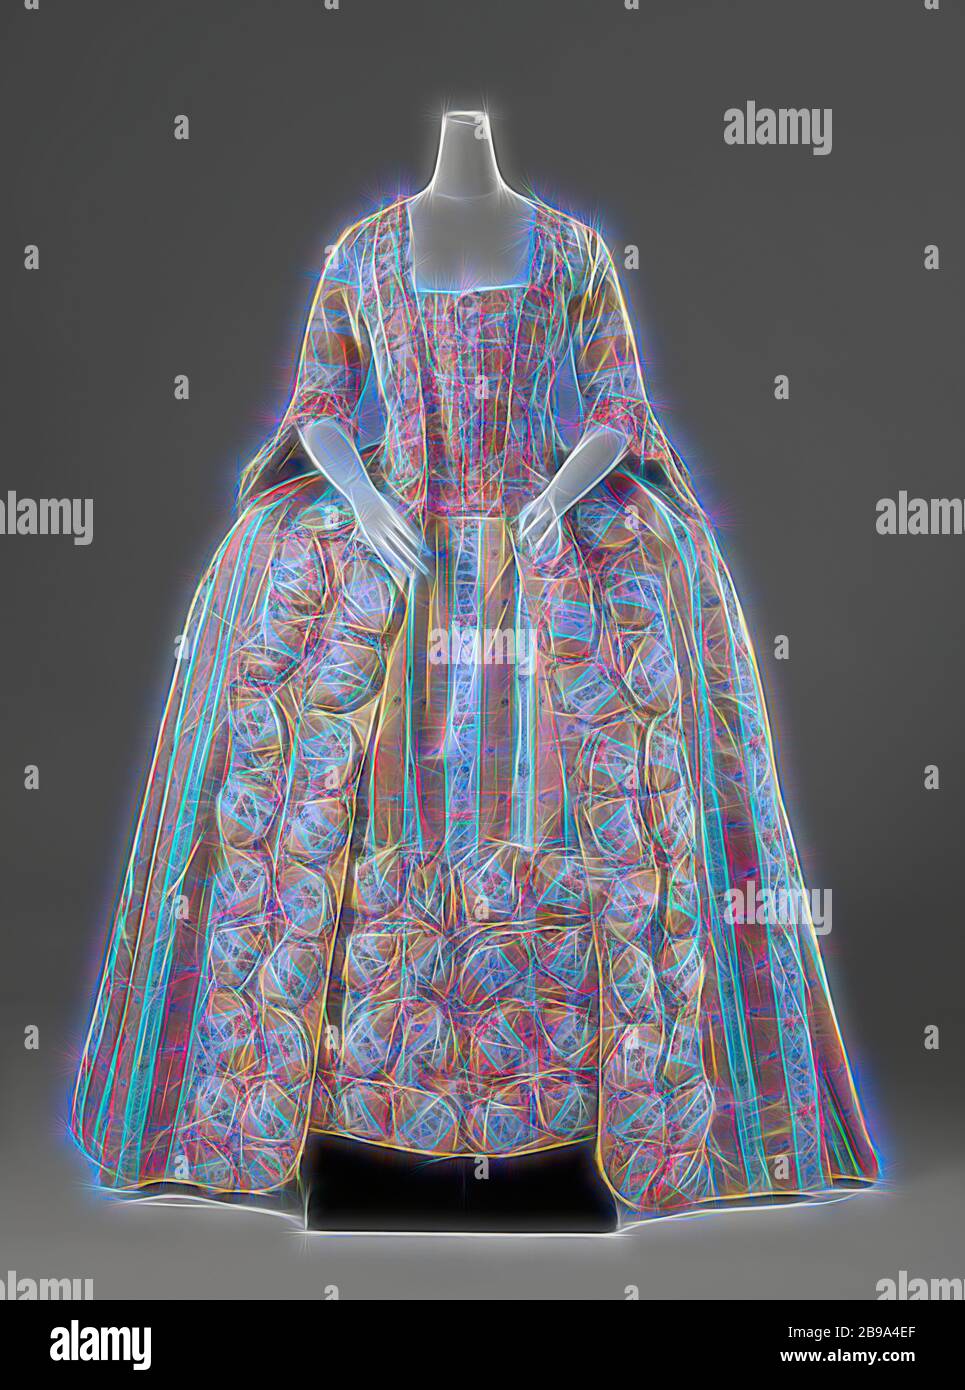 Sack-Back Gown with Skirt (robe à la française) Over frock with skirt or robe à la française, Frock or robe à la française consisting of a frock and matching skirt, silk with vertical yellow and white stripes and scatter motif multicolored bouquets, with oval pouffes and lined with a multicolored chiné à la branche. Model: The frock has a number of deep bell pleats on the back, half-length close-fitting sleeves with engagementantes, chest piece with button fastening at the center front. The skirt consists of full bands on the front, while the invisible parts of the skirt consist only half of t Stock Photo